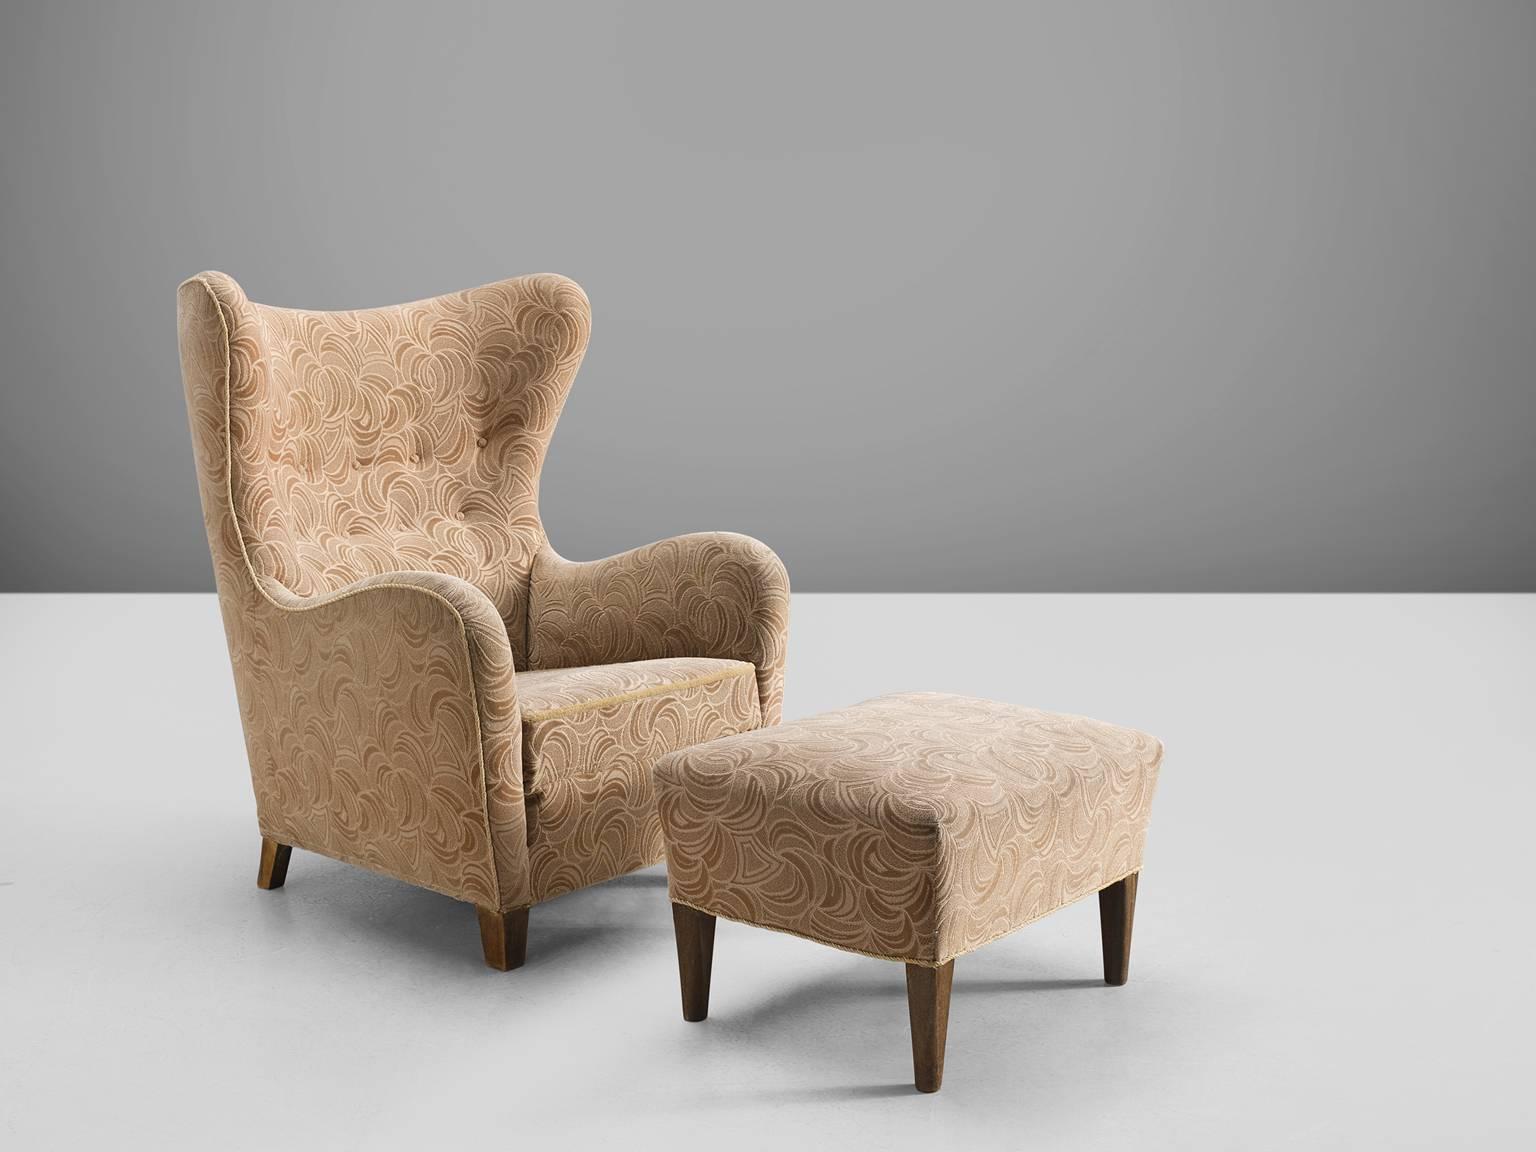 Thorald Madsen for Fritz Hansen, fabric and wood, Denmark, 1942. 

Classical high back chair, with beautiful tufted back. The chair is combined with a matching ottoman which makes this a rare find. The design for Madsen is inspired on a